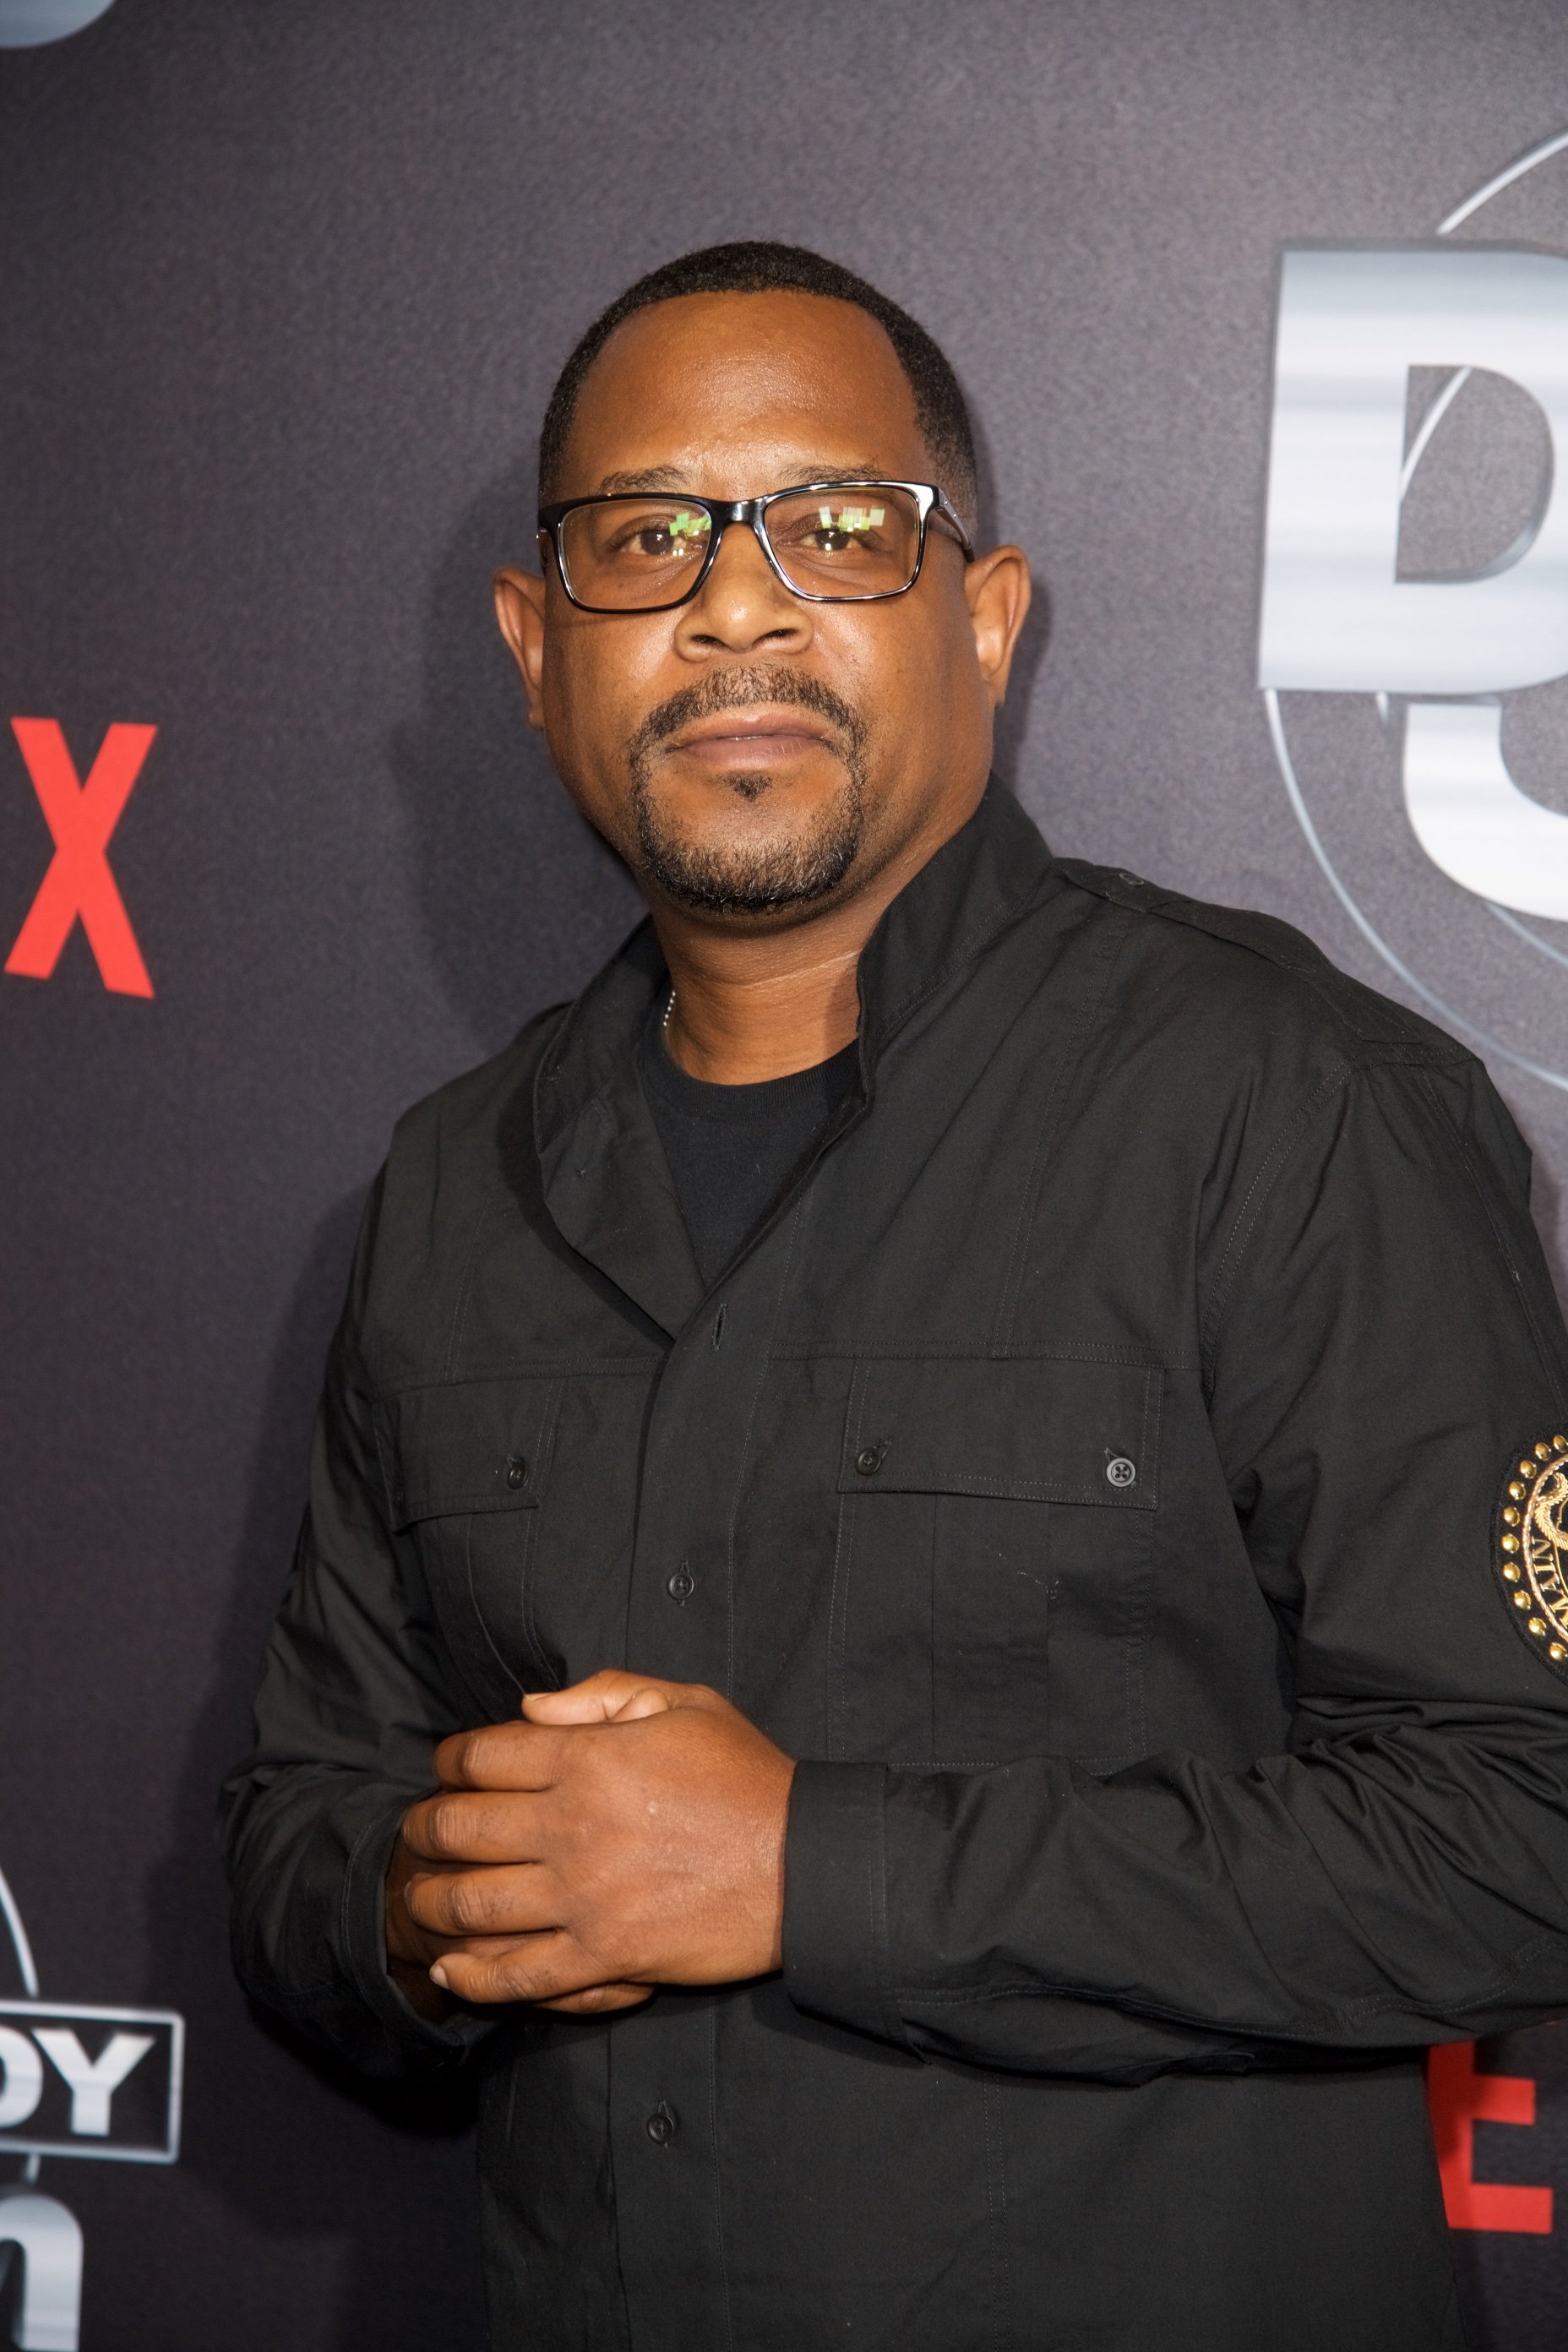 Martin Lawrence at a Netflix event in September 2017. | Photo: Getty Images